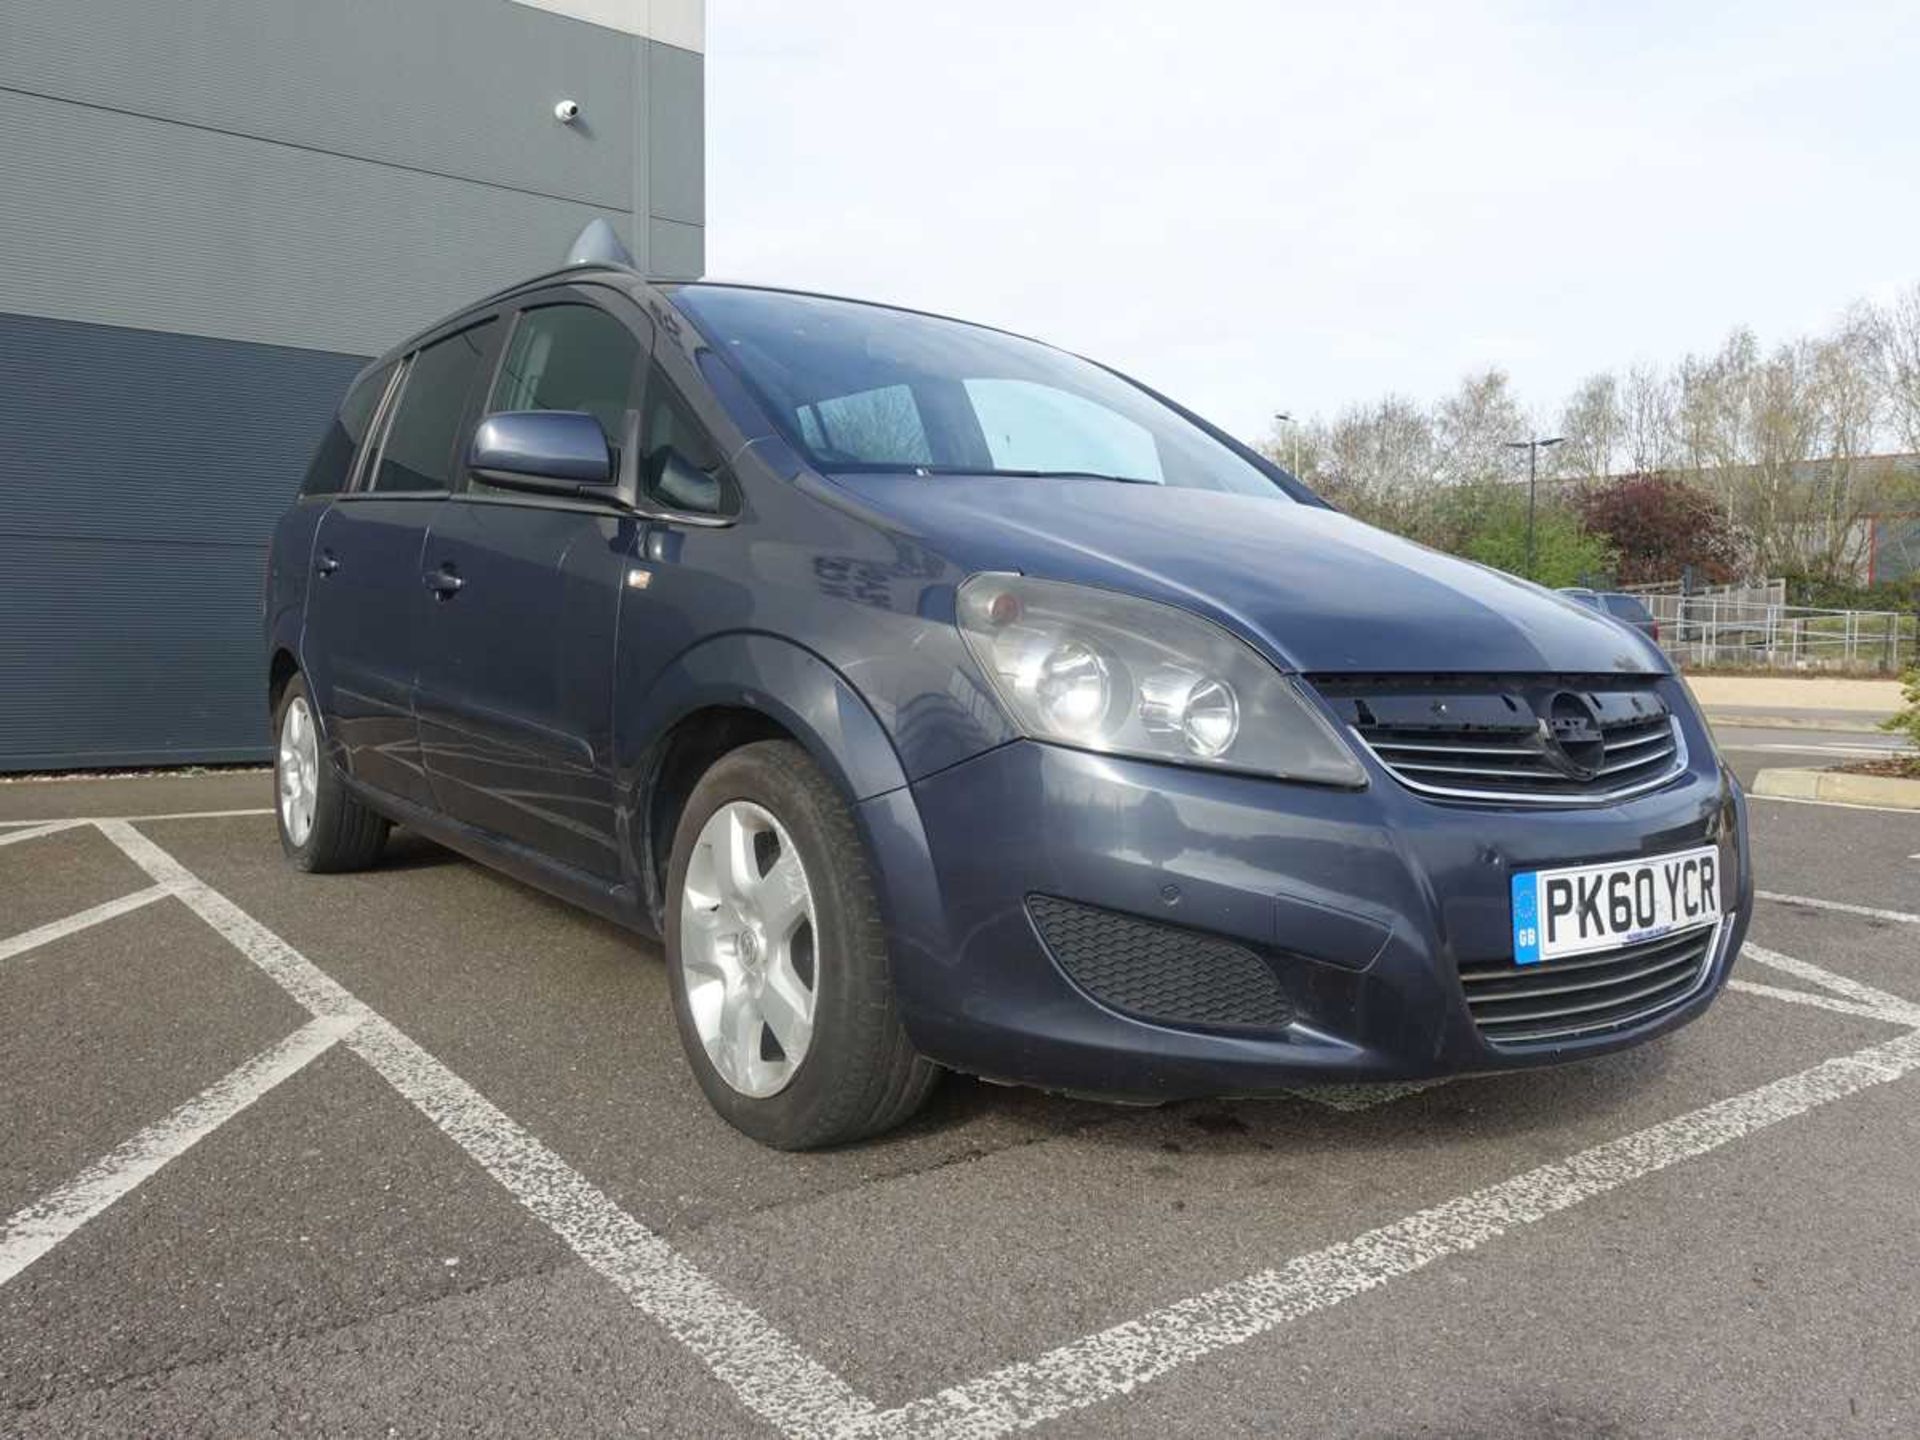 (PK60 YCR) Vauxhall Zafira Exclusiv CDTI auto in blue, first registered 29/12/2010, MPV, - Image 2 of 10